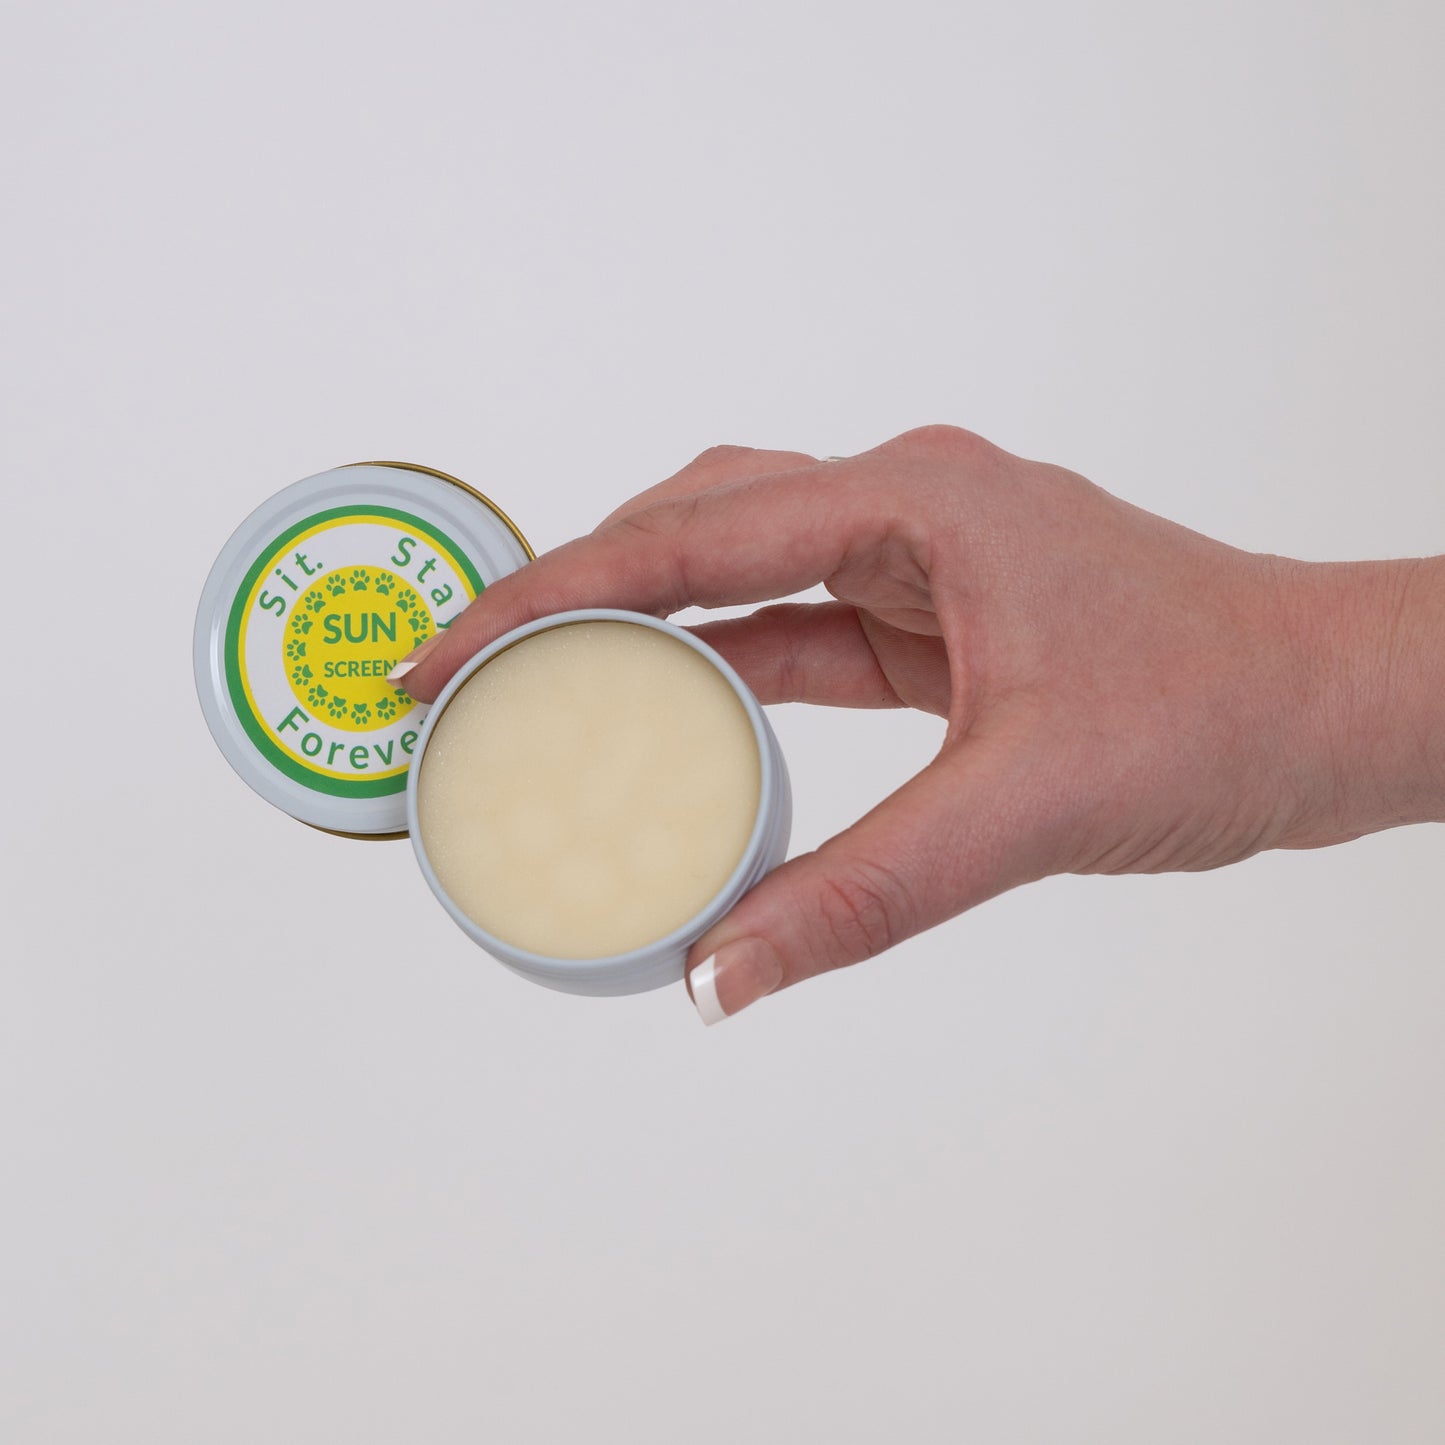 A hand holding an open tin of Sit.Stay.Forever sunscreen, showing the contents inside.